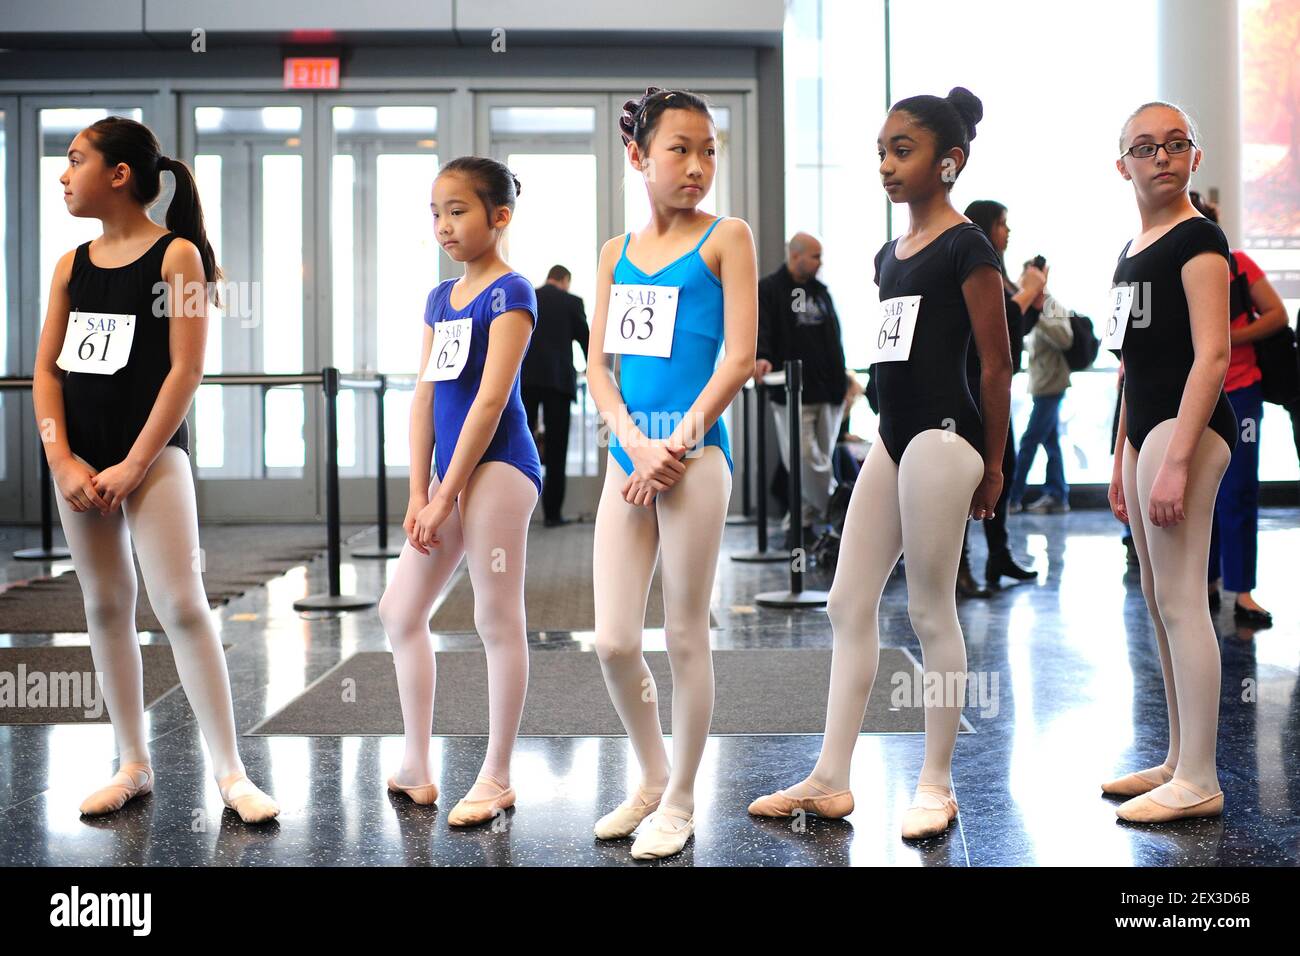 Five young girls wait in line to go auditioning for the School of American  Ballet (SAB), in the New York Borough of Queens, NY, on April 19, 20155.  With no previous dance